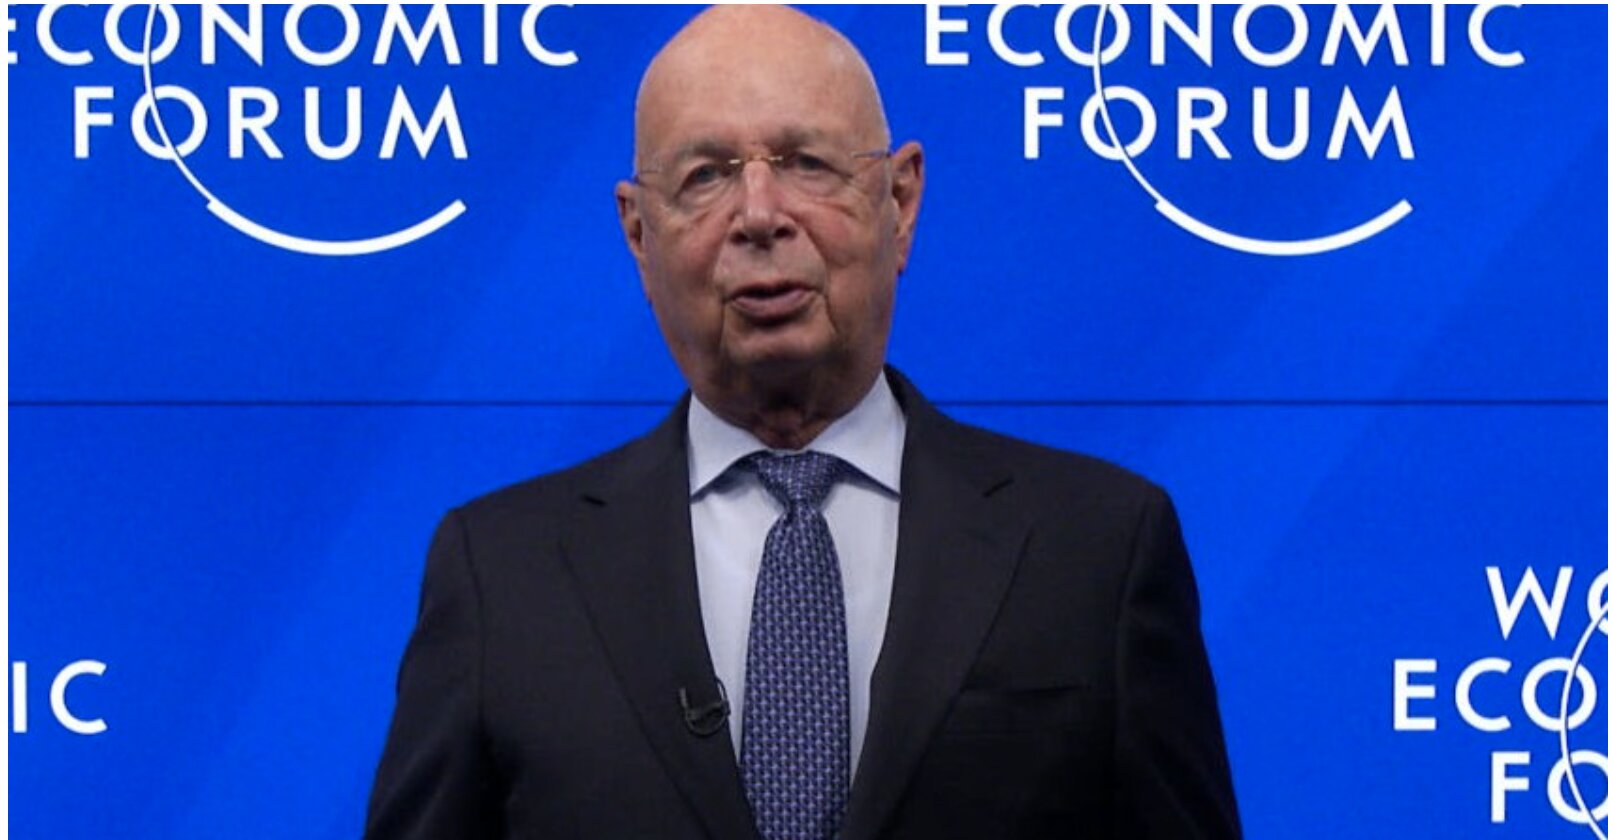 Globalist Klaus Schwab: World Will “Never” Return to Normal After COVID